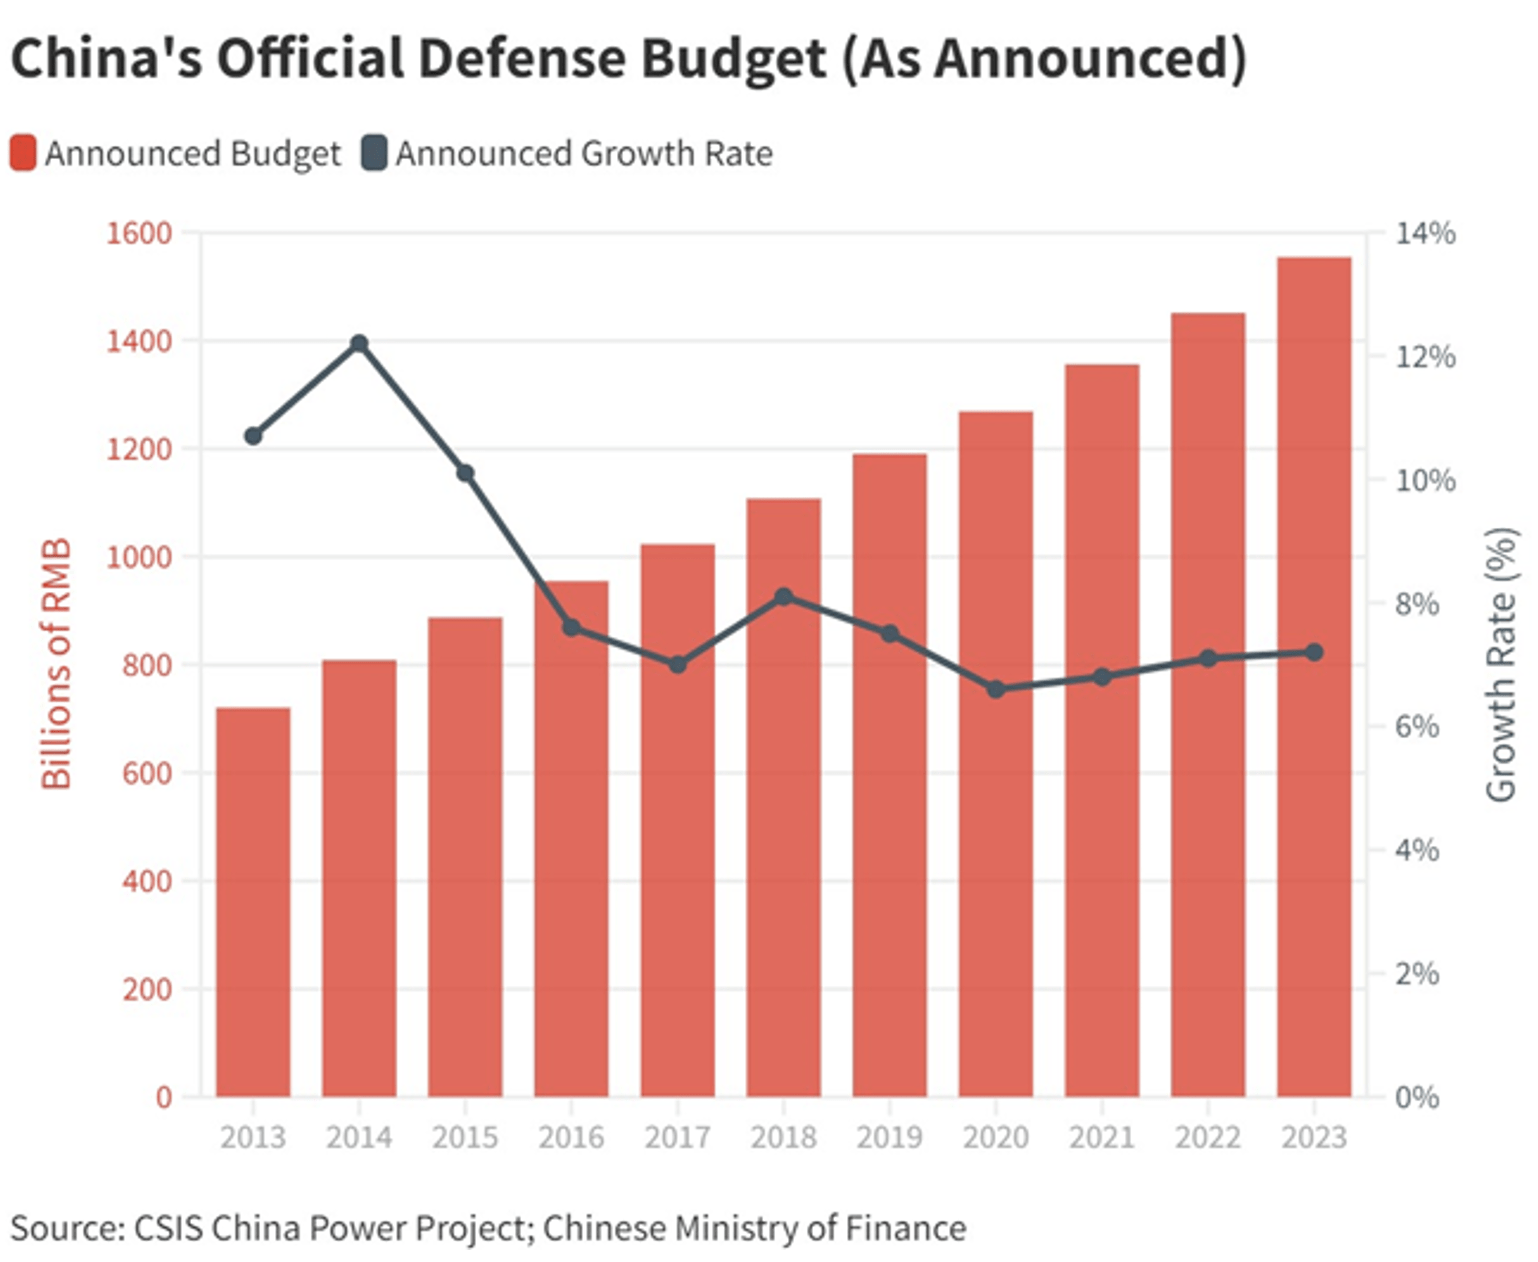 China’s official Defense Budget (as announced) and announced Growth Rate from 2013 until 2023